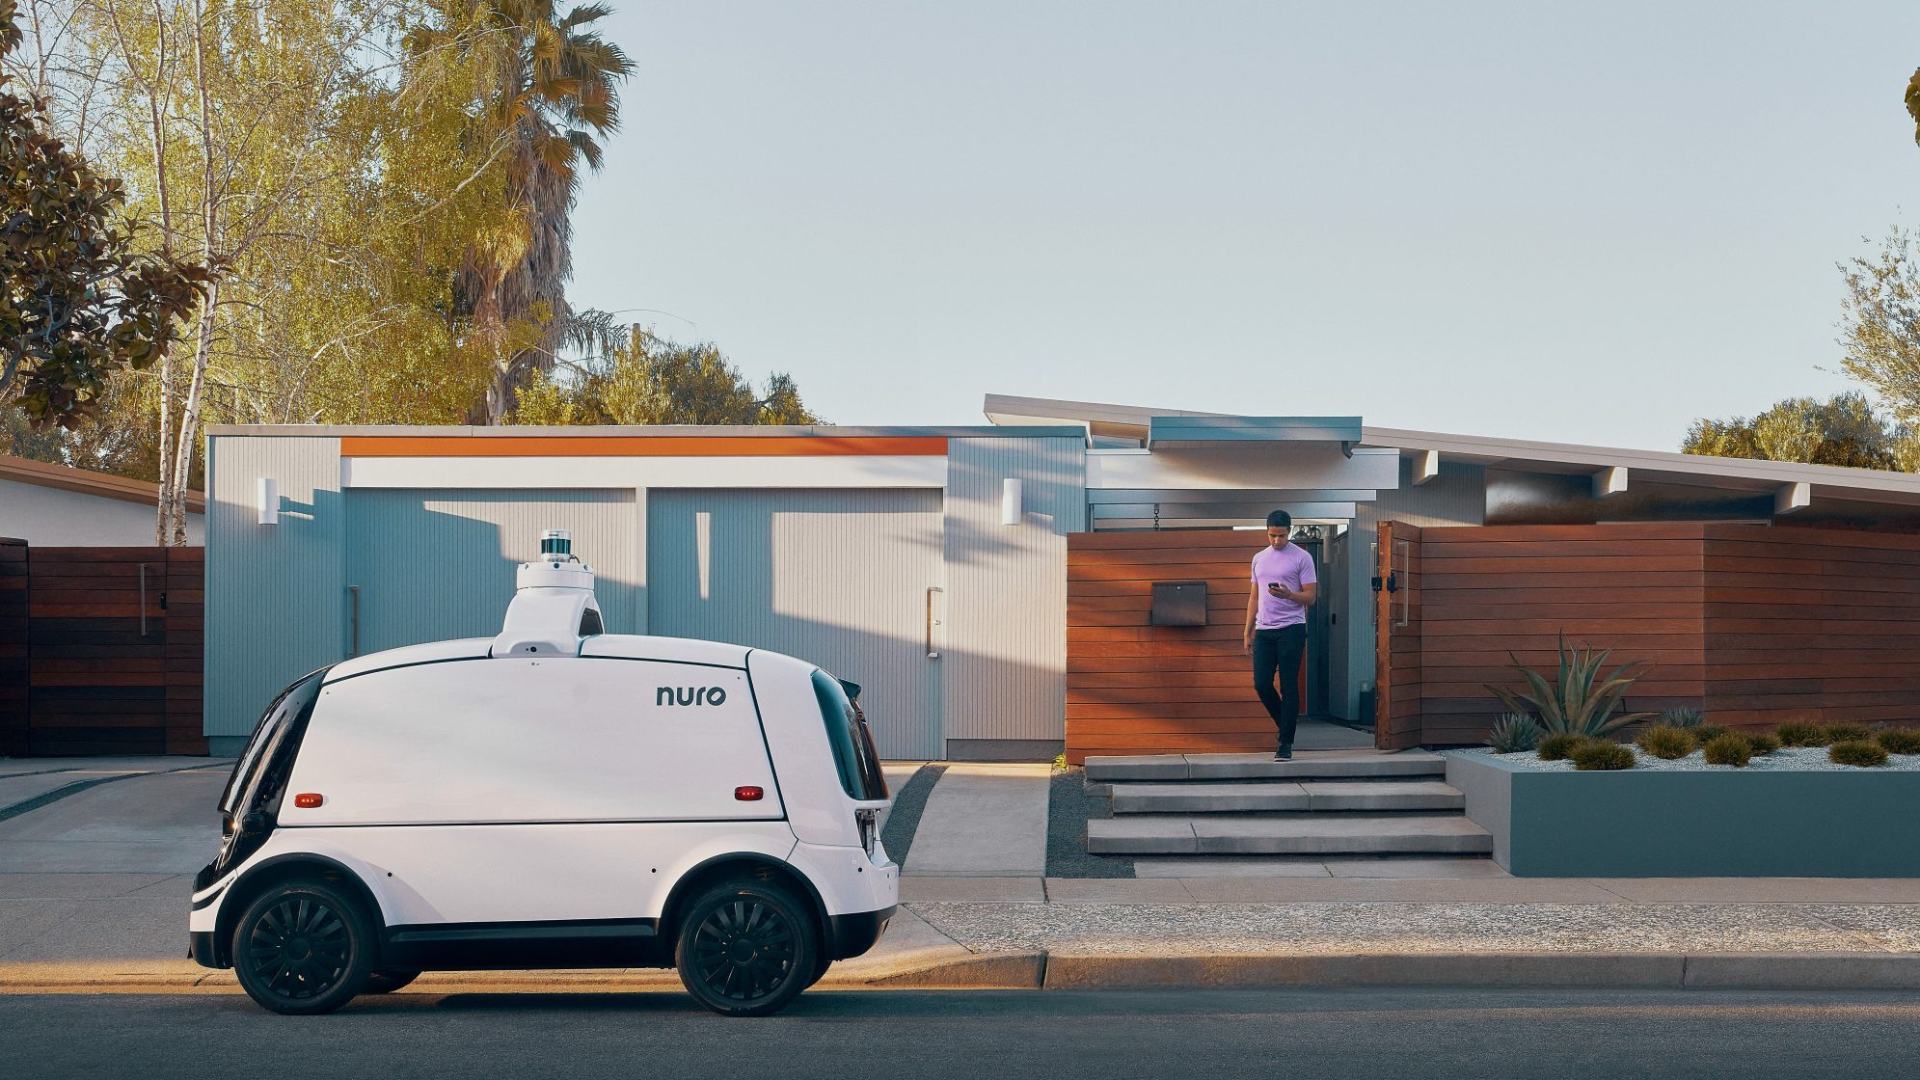 Nuro: Shaping Autonomous Local Delivery Services of the Future